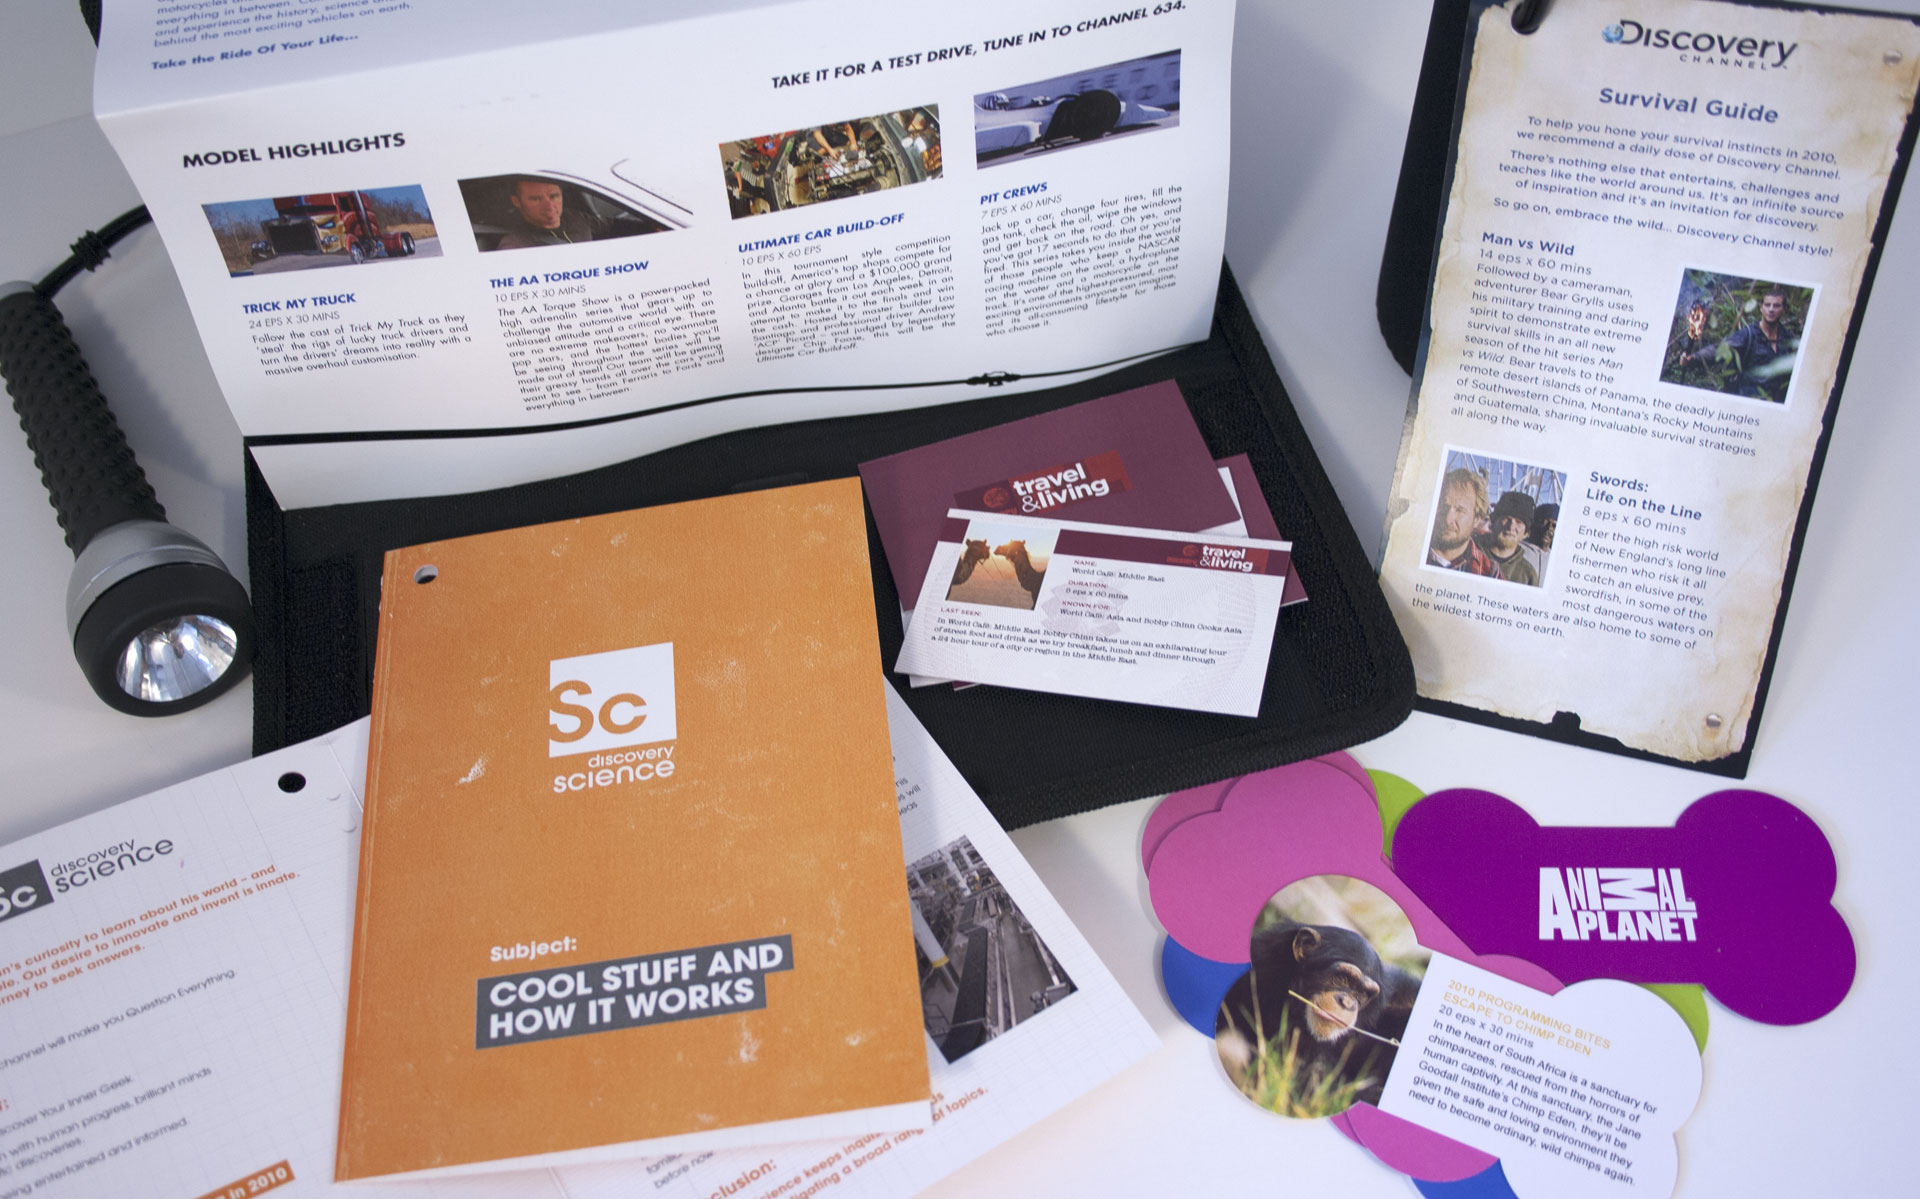 Discovery Networks marketing materials & event work designed by Amy Howard